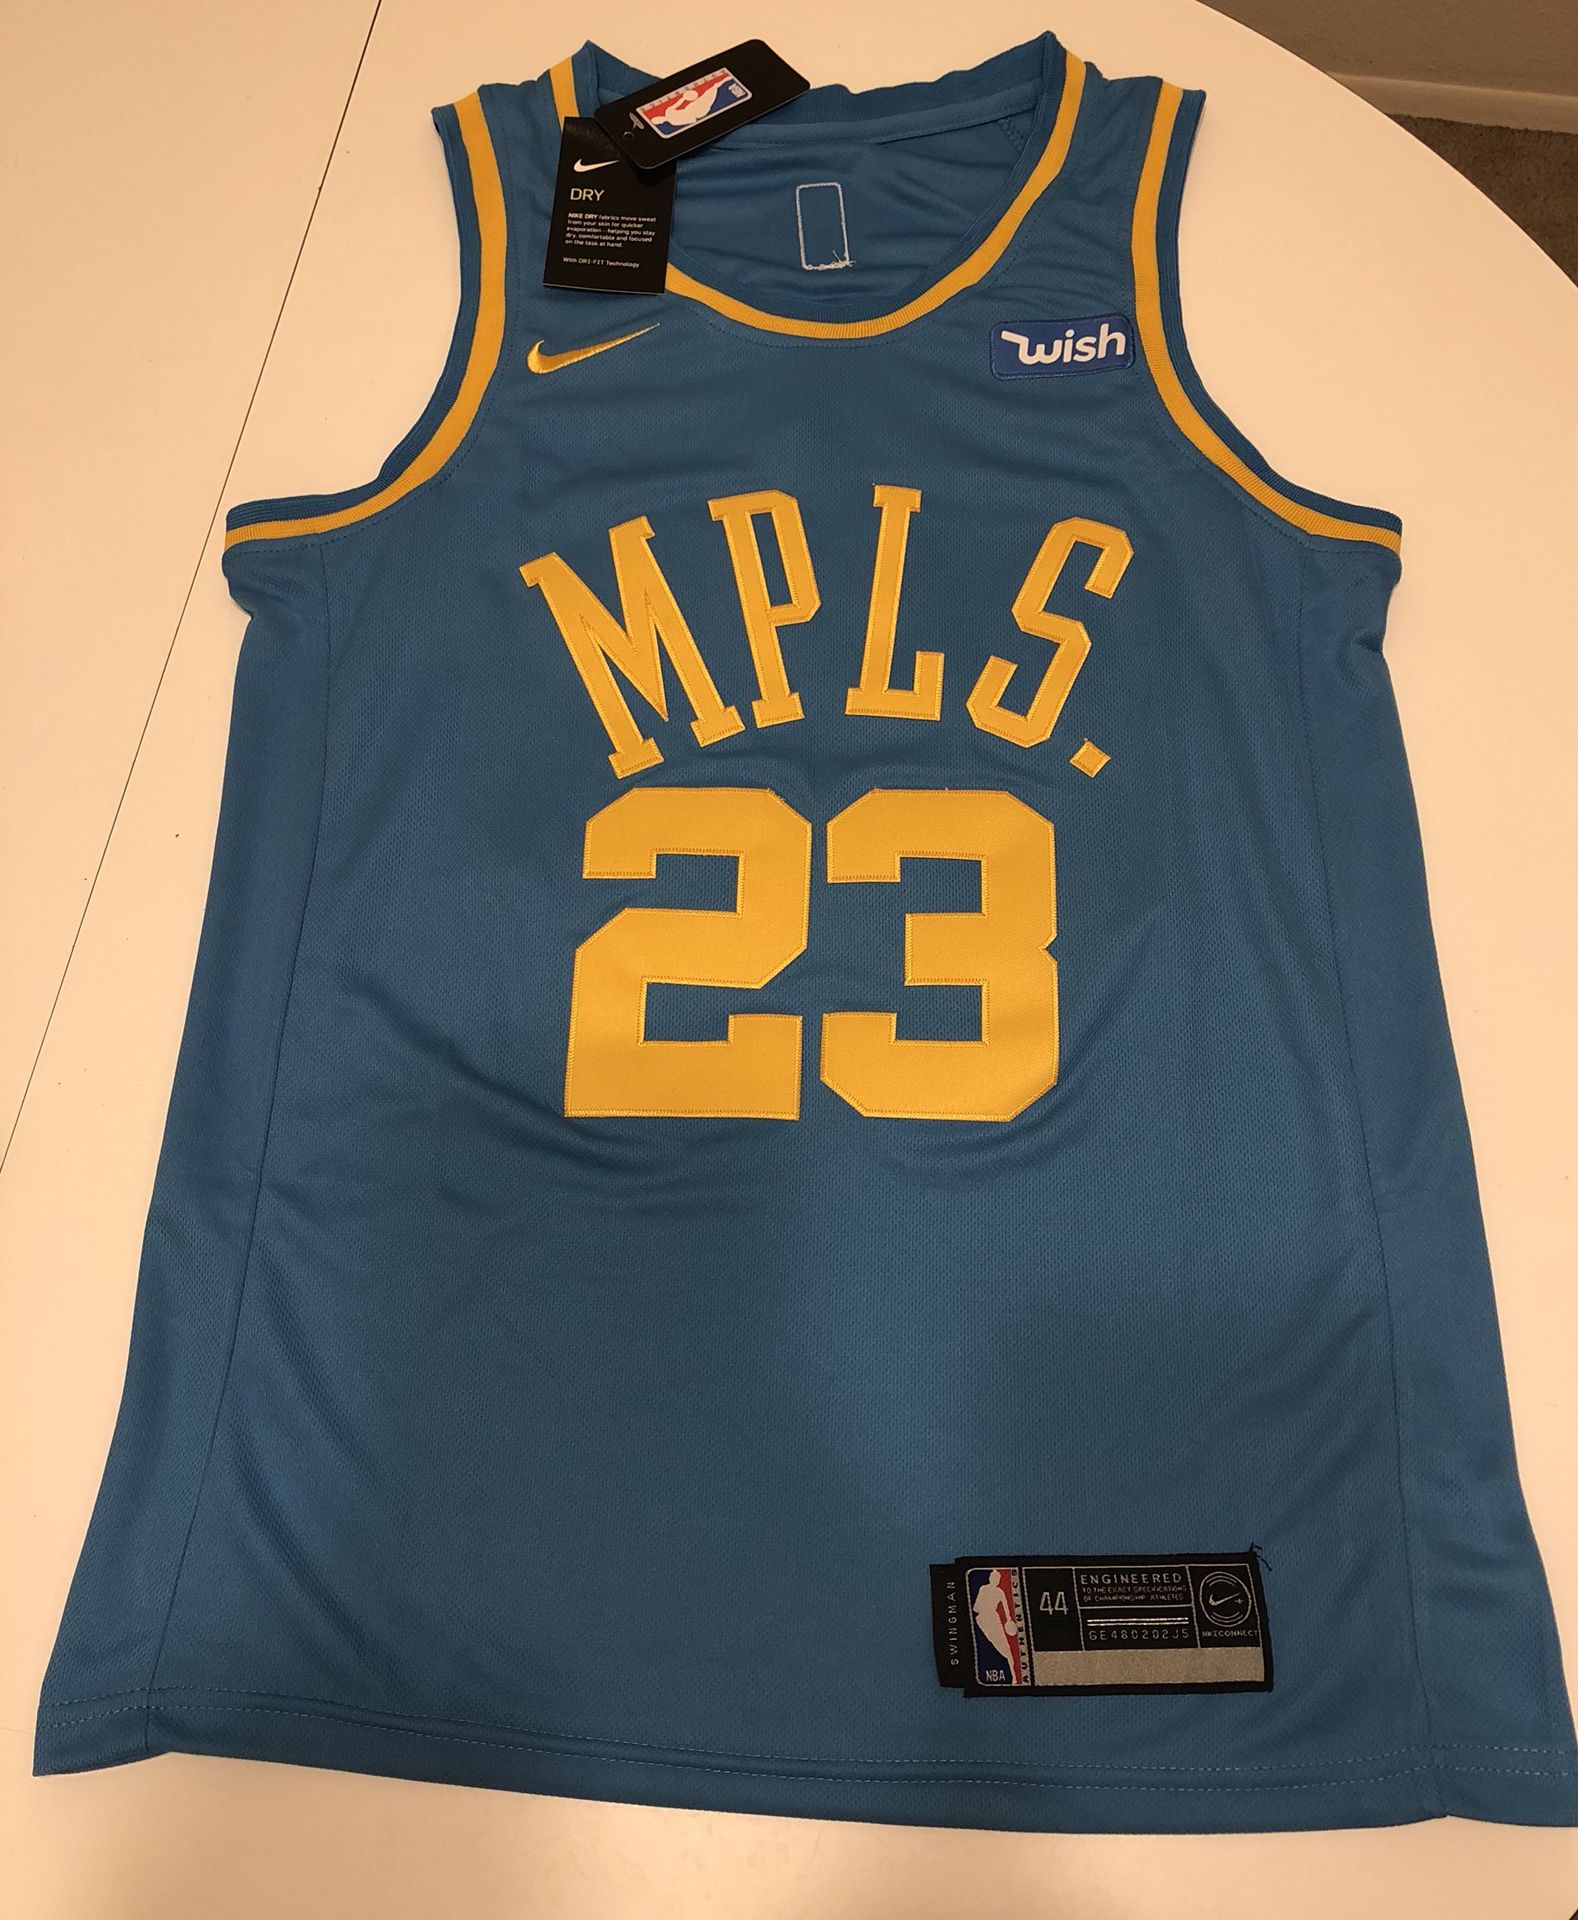 Lebron James Minneapolis Lakers Jersey for Sale in Lansing, MI - OfferUp